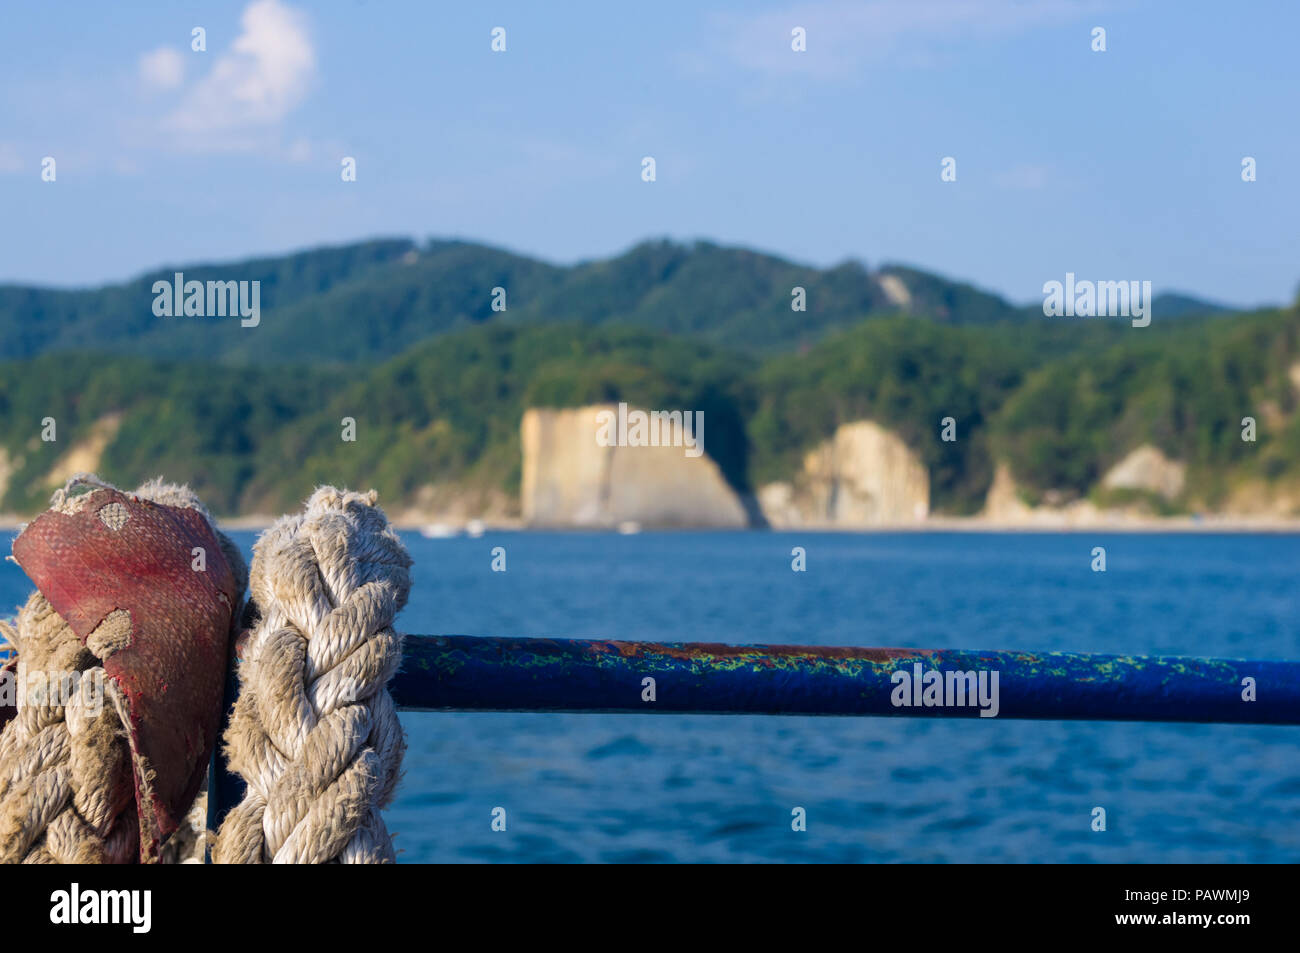 Old braided rope on the wooden deck of a sea boat, cleats, anchor mechanisms Stock Photo